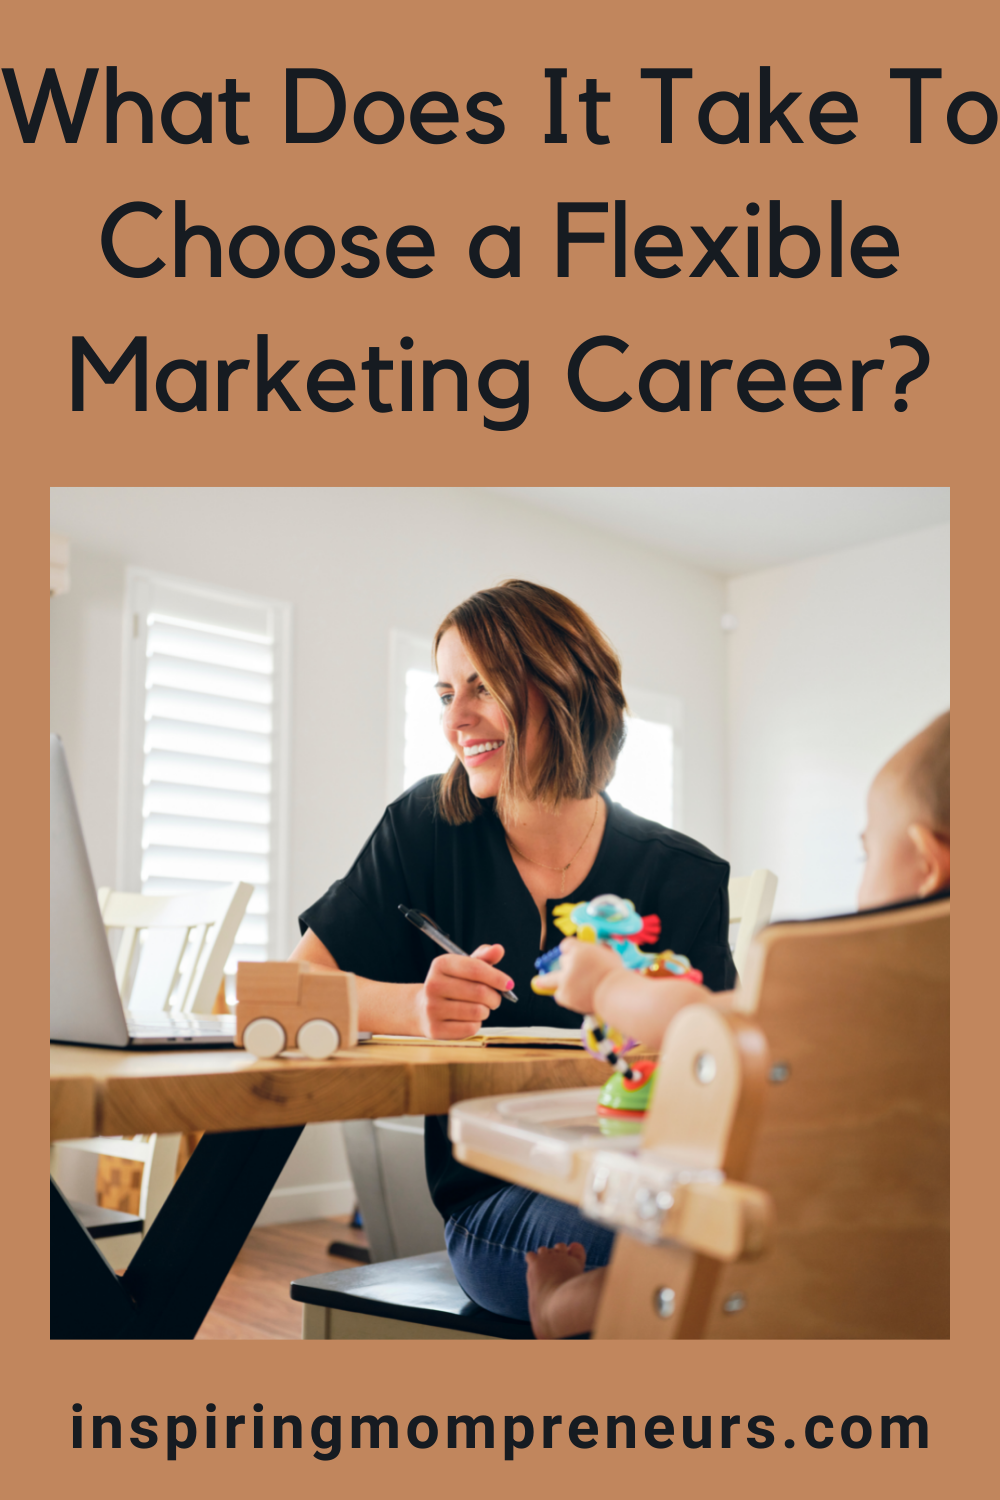 Dreaming of having a flexible marketing career?  Here are our 4 top tips to help find and build the right career in marketing while parenting small children.